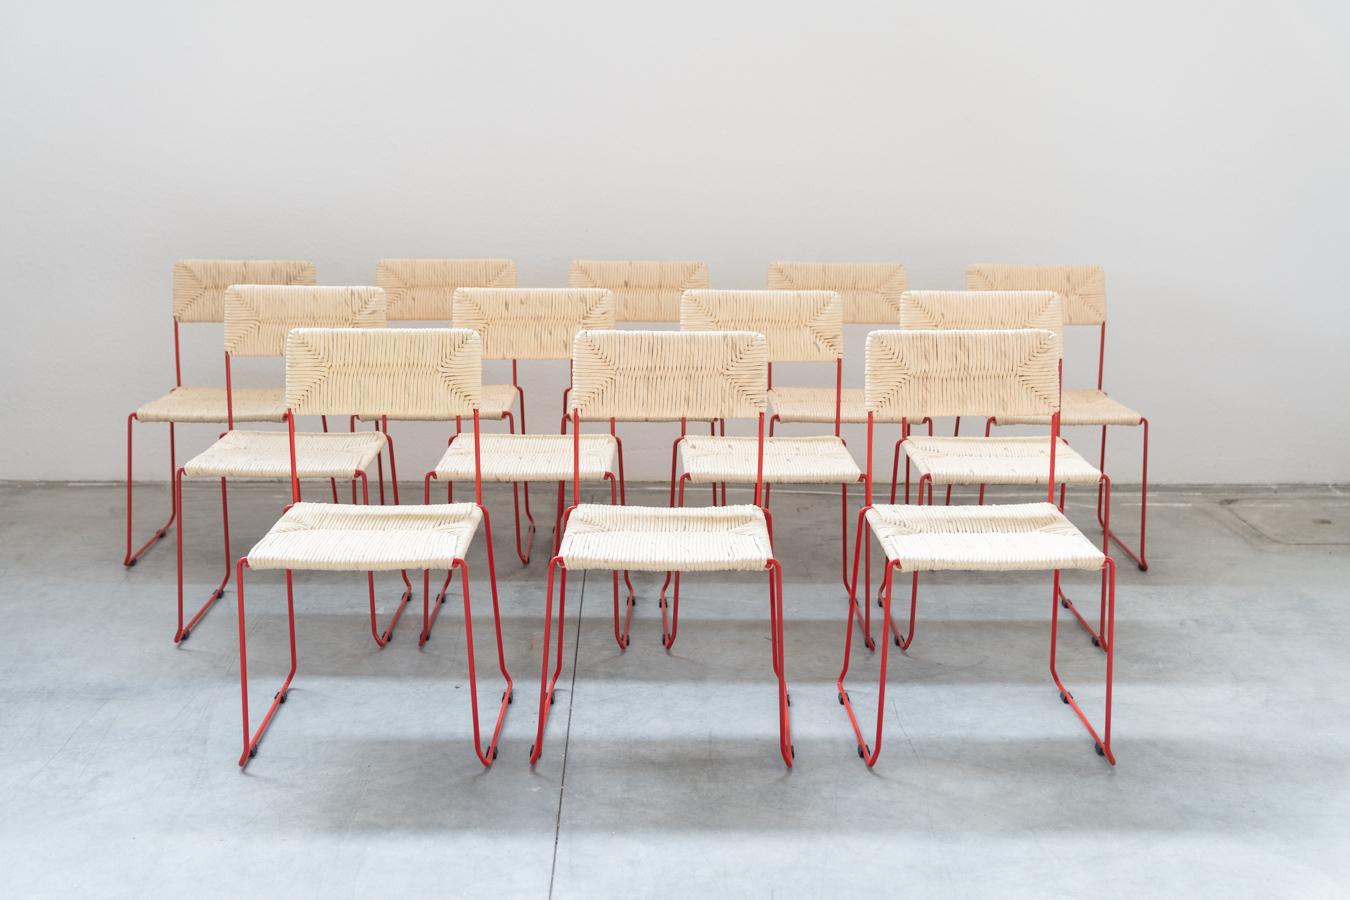 PIRELA ATELIER style chairs, nr 160, also sellable individually, 2000s
NEW chairs, still boxed, made of curved iron painted red. The seat and back are hand stuffed on the frame (paper straw) to ensure their great strength. They can be stacked up to